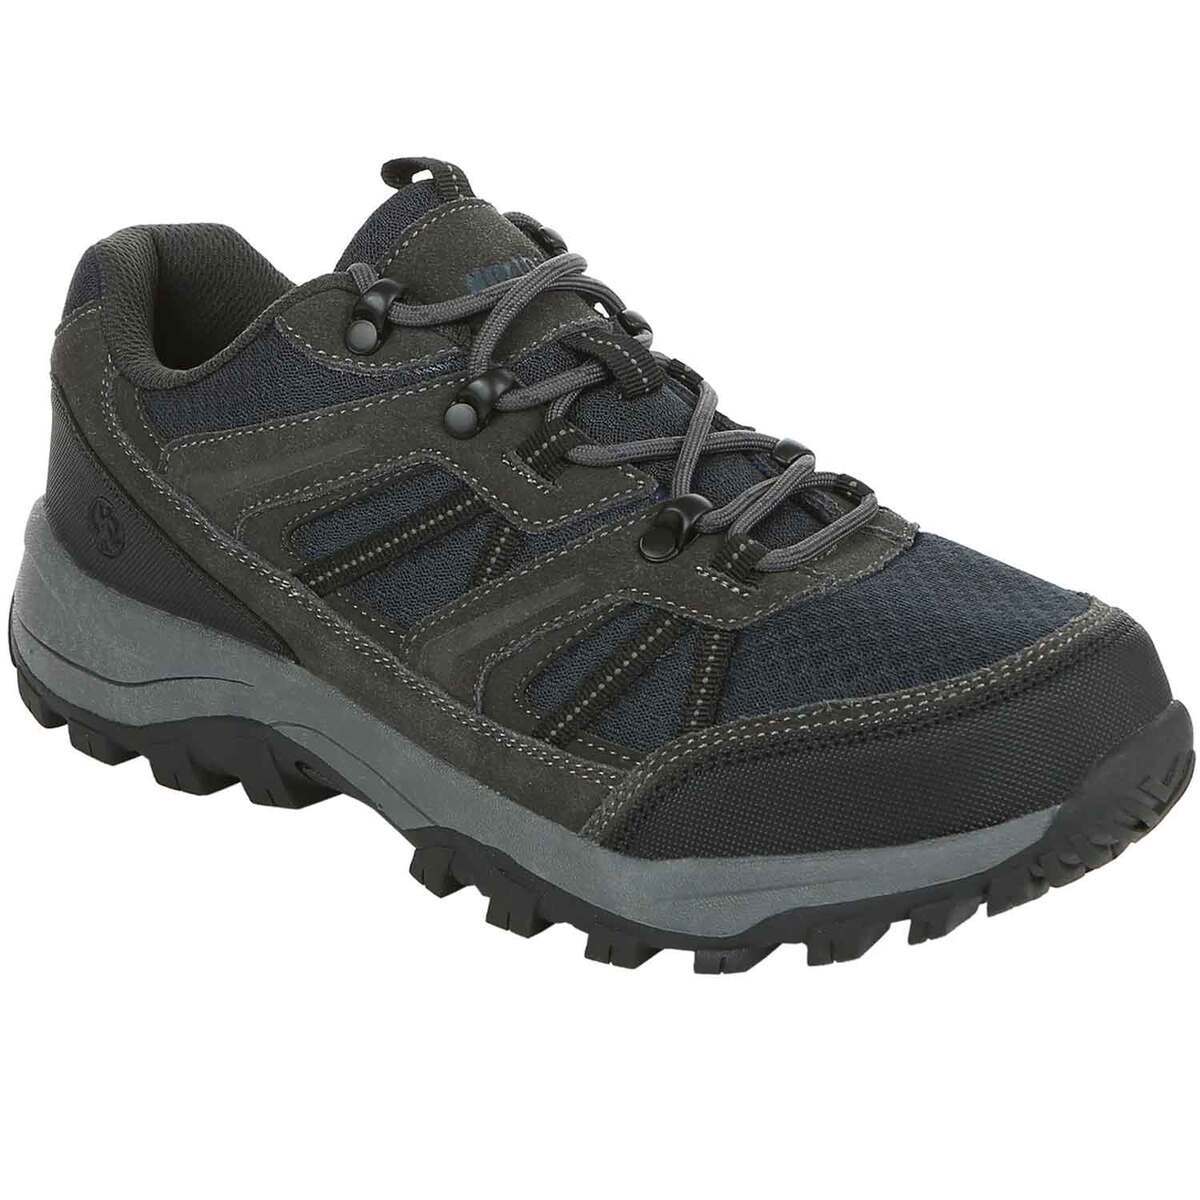 Northside Men's Arlow Canyon Trail Low Hiking Shoes | Sportsman's Warehouse